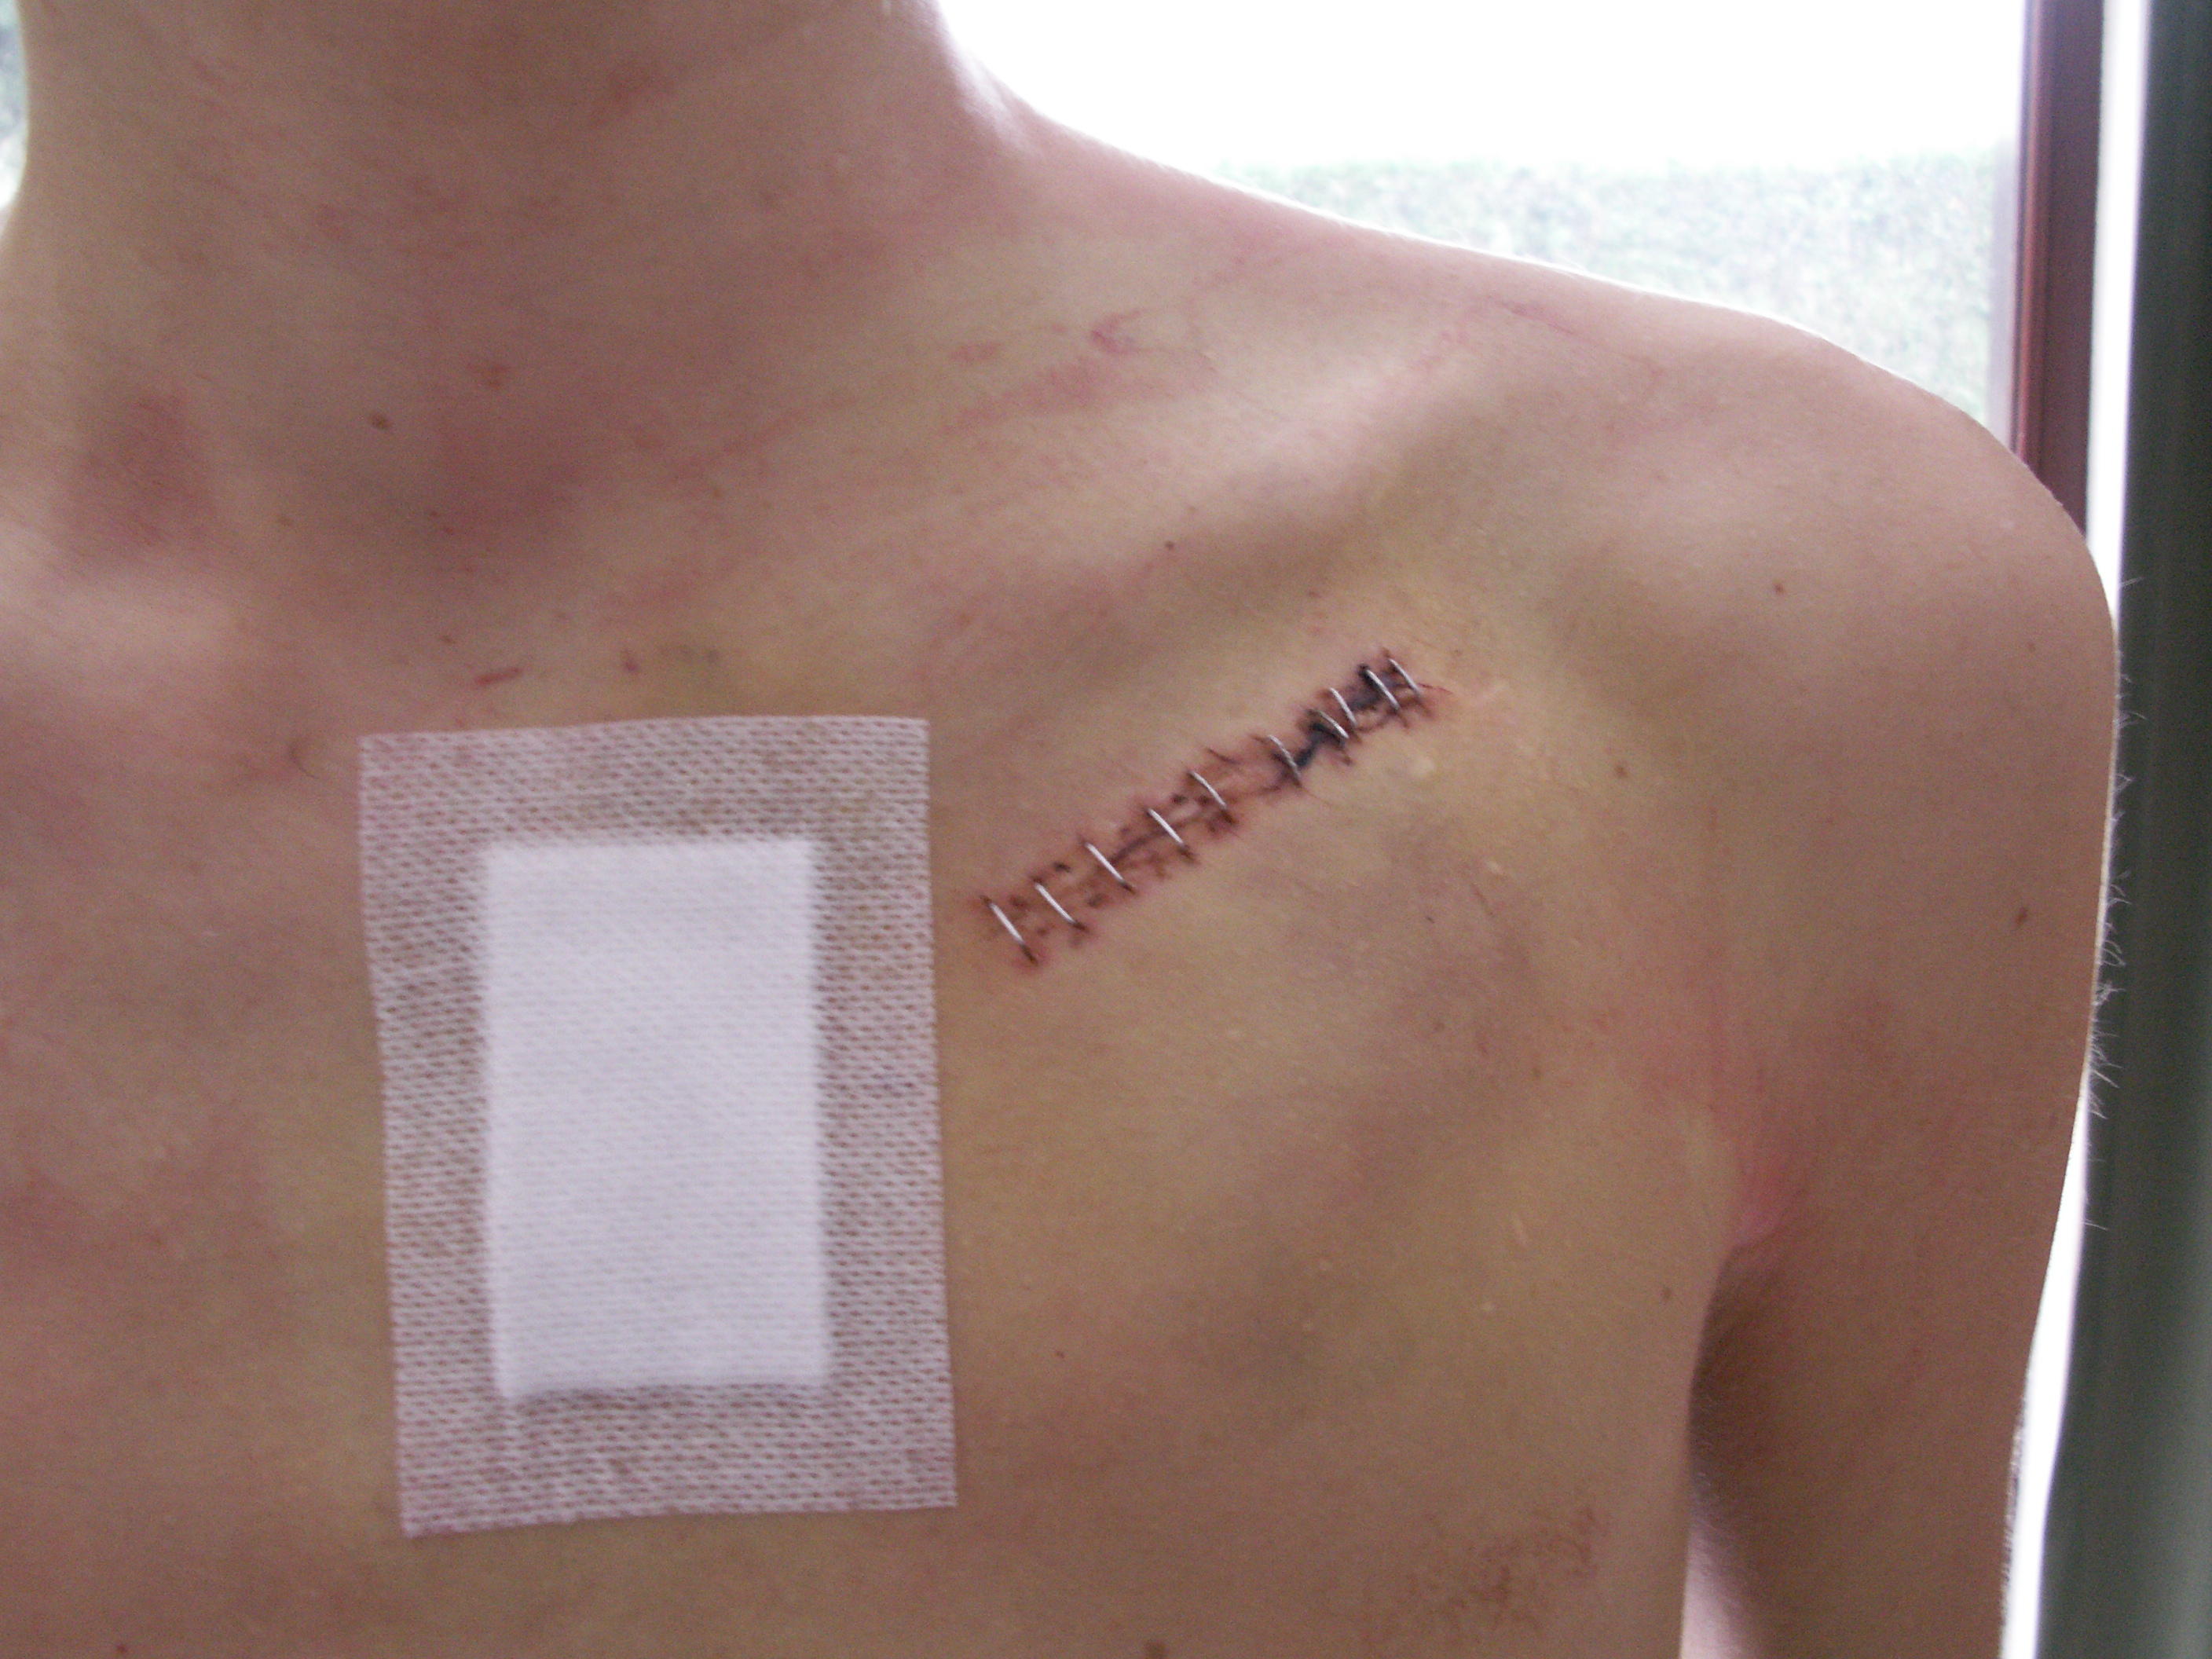 File:Pacemaker Wound.jpg